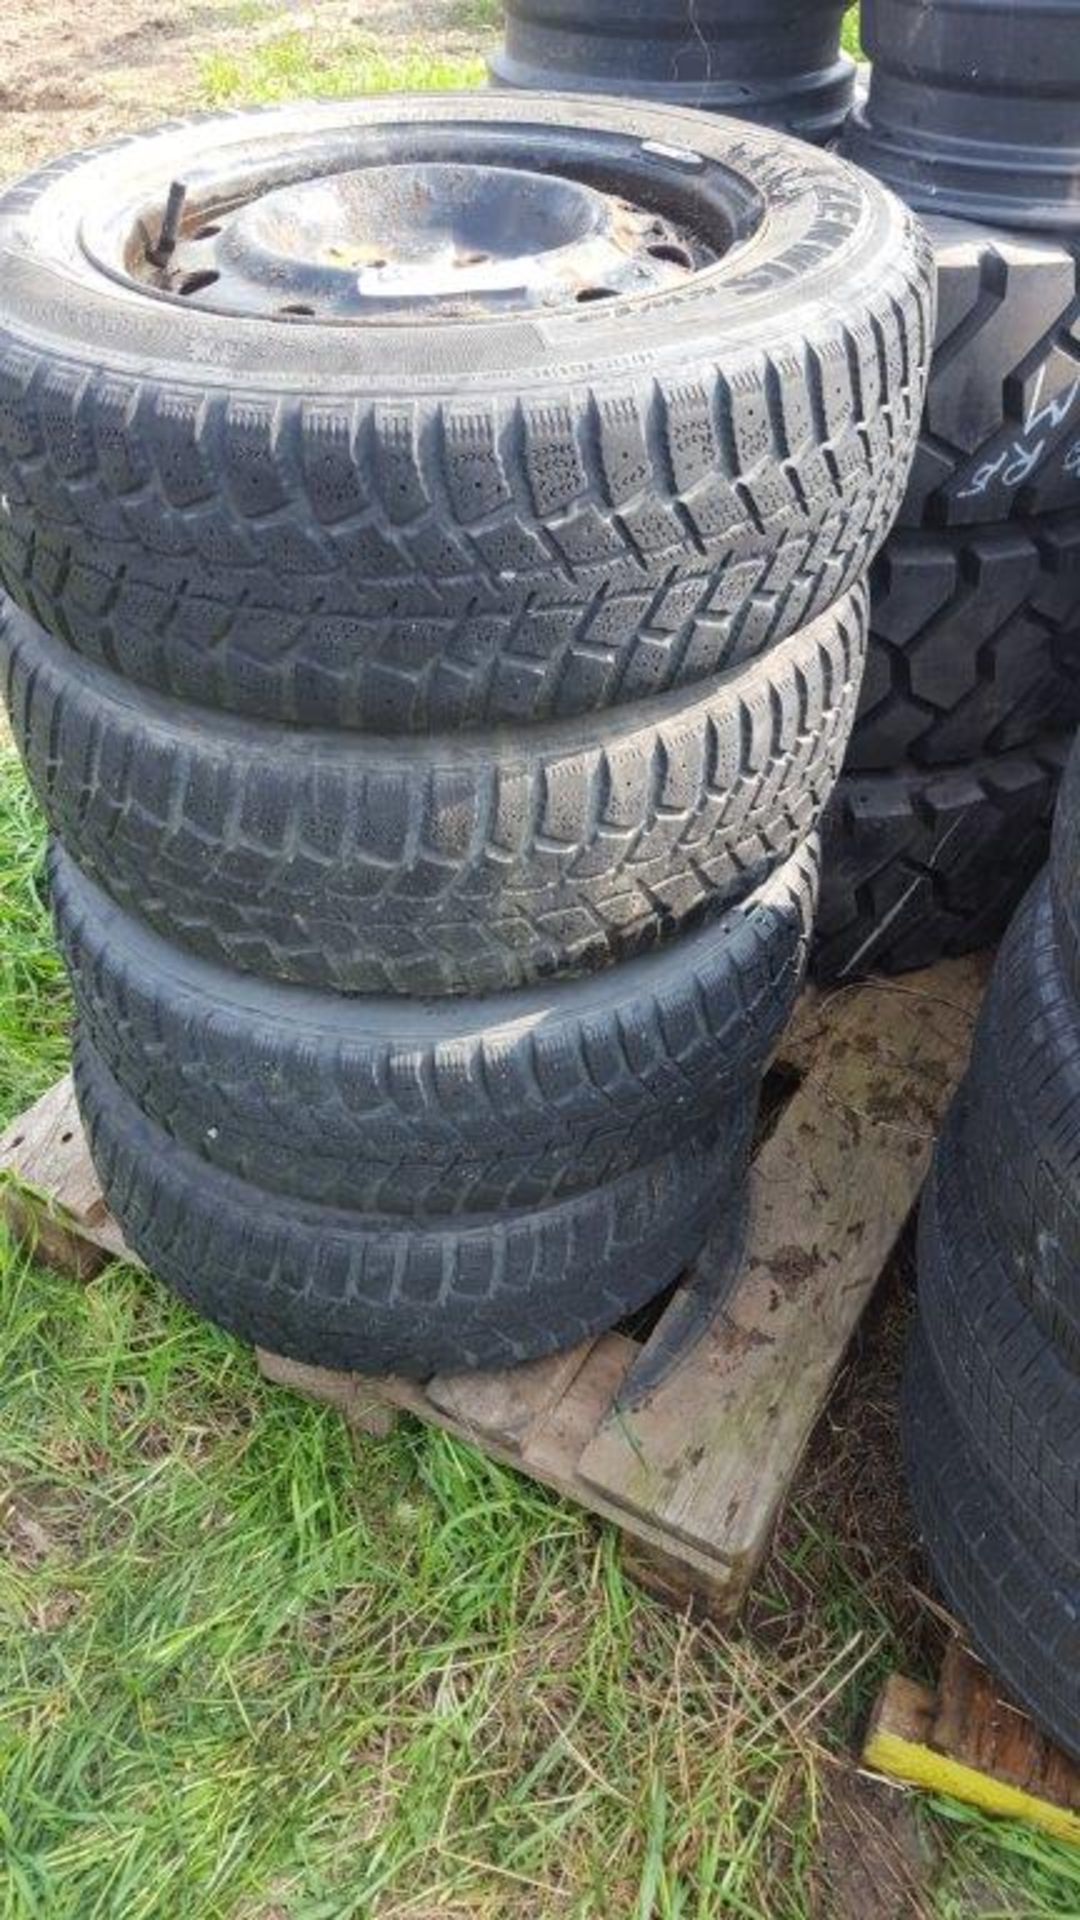 lot of 4 winter tires with 5 holes rims